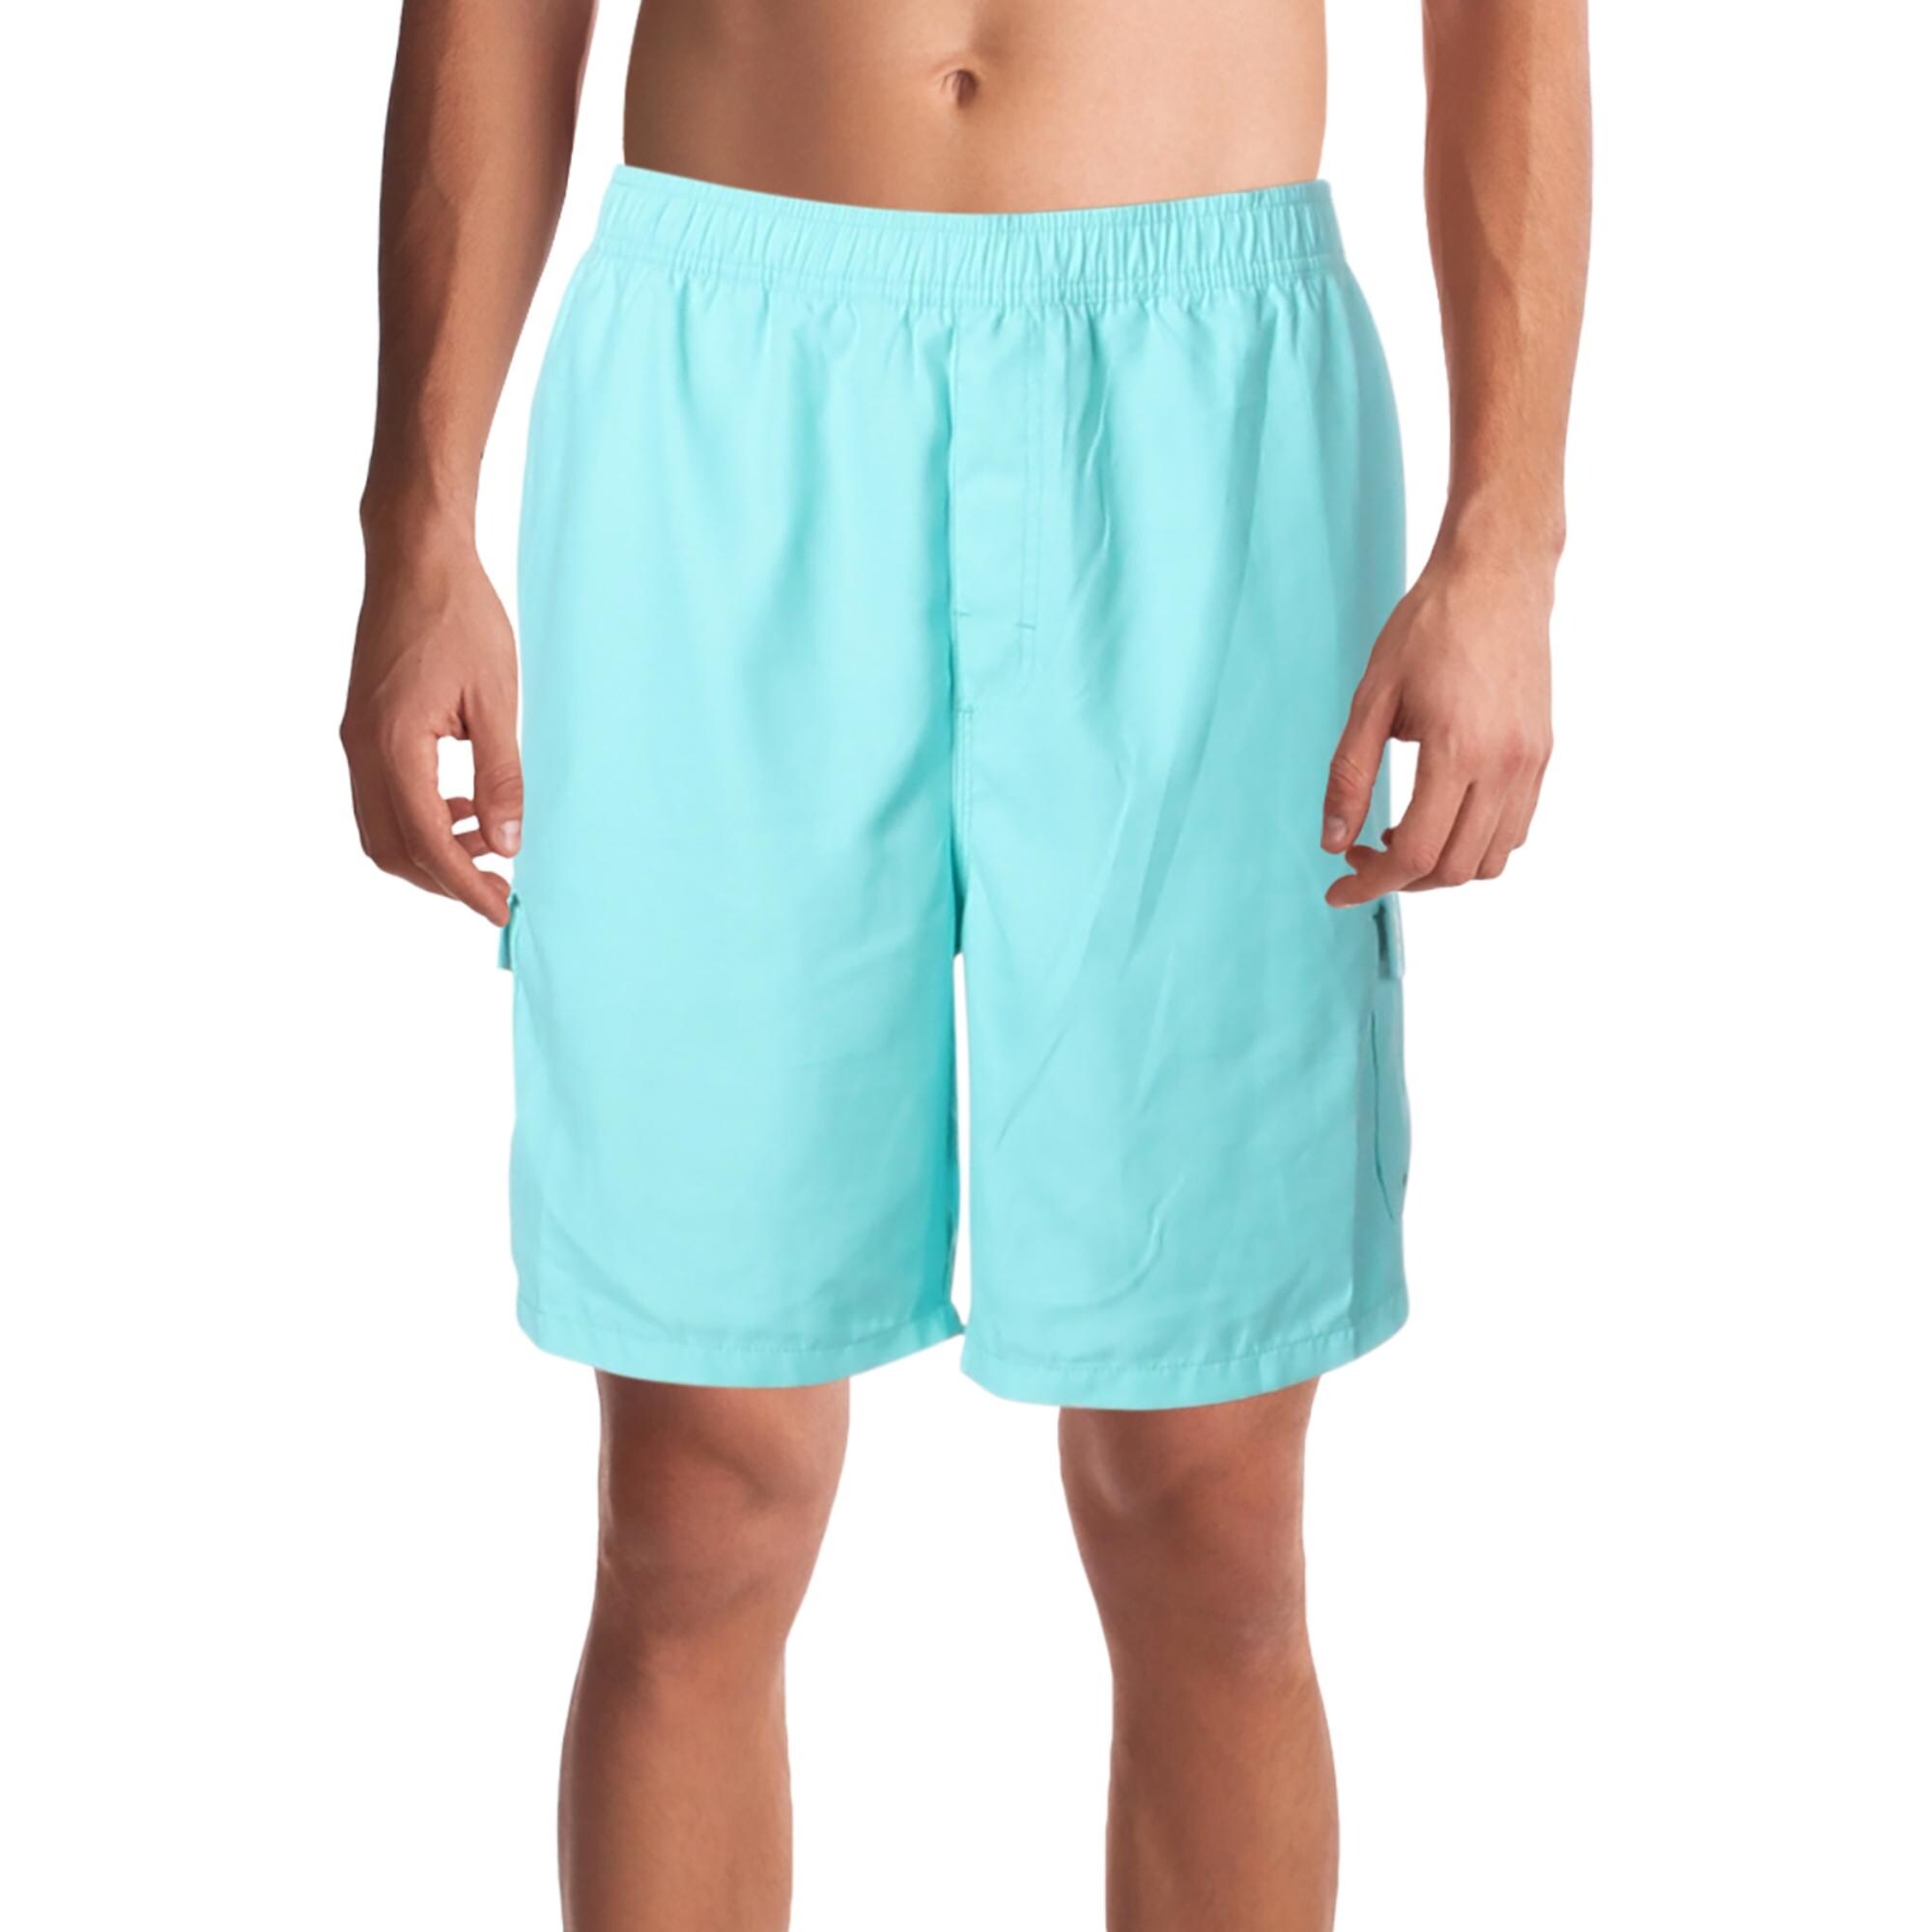 MAPOOL SWIMMING TRONK BRIEF 7 colors SHORTS QUIKSILVER MEN'S MED 